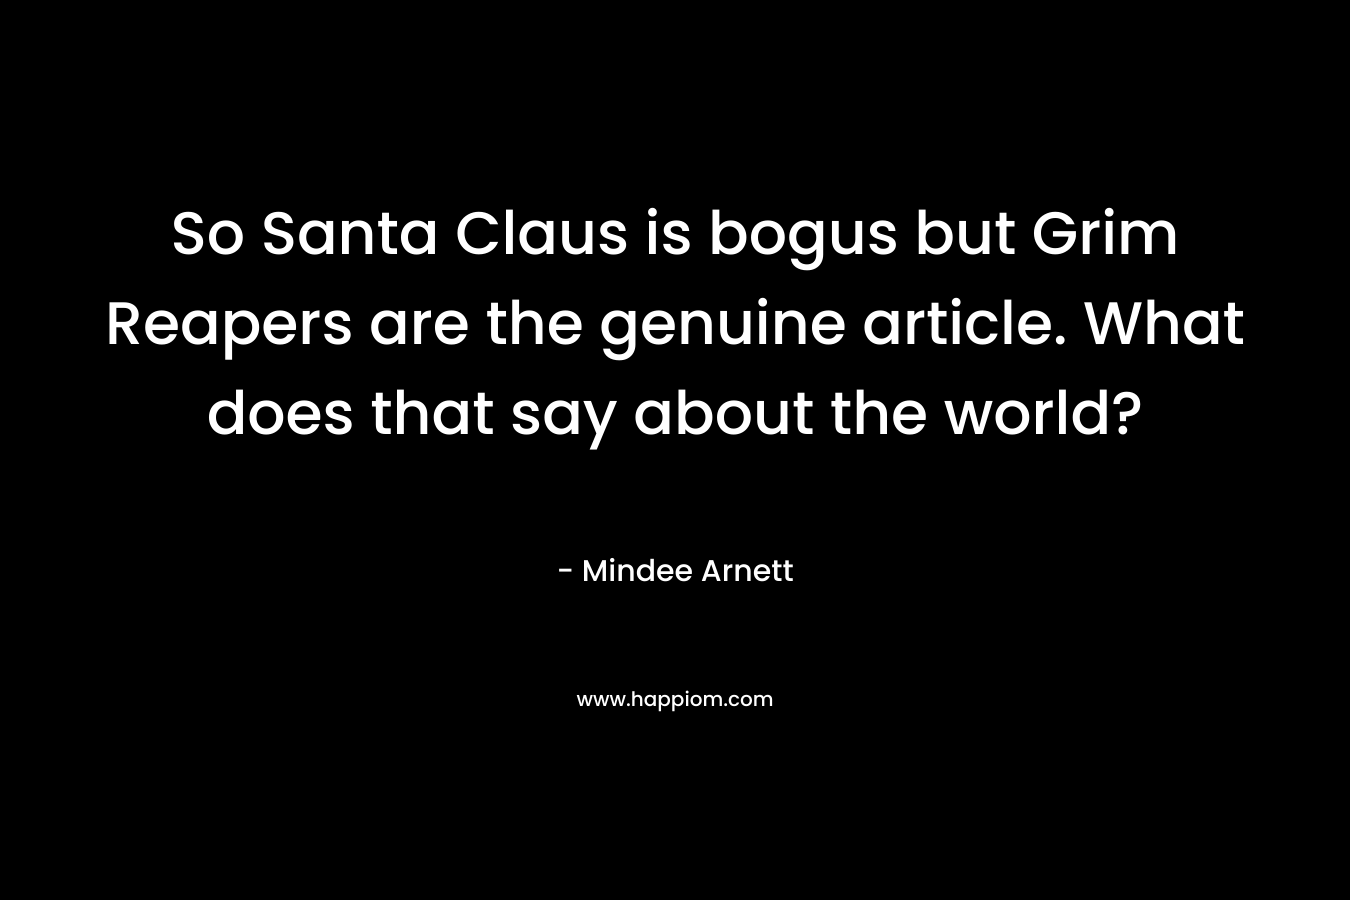 So Santa Claus is bogus but Grim Reapers are the genuine article. What does that say about the world?